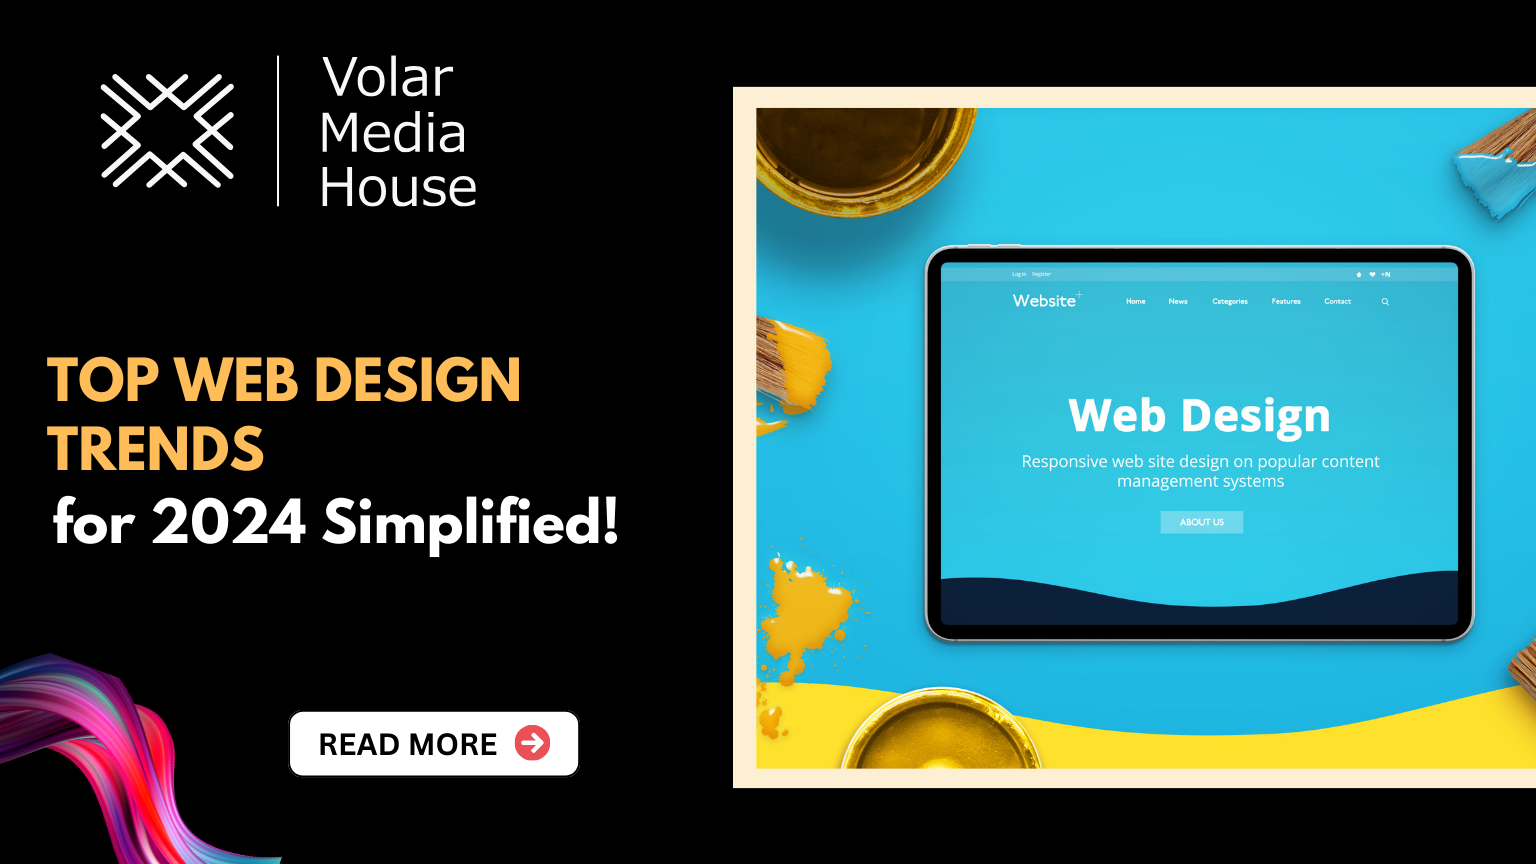 Top Web Design Trends for 2024 Simplified!